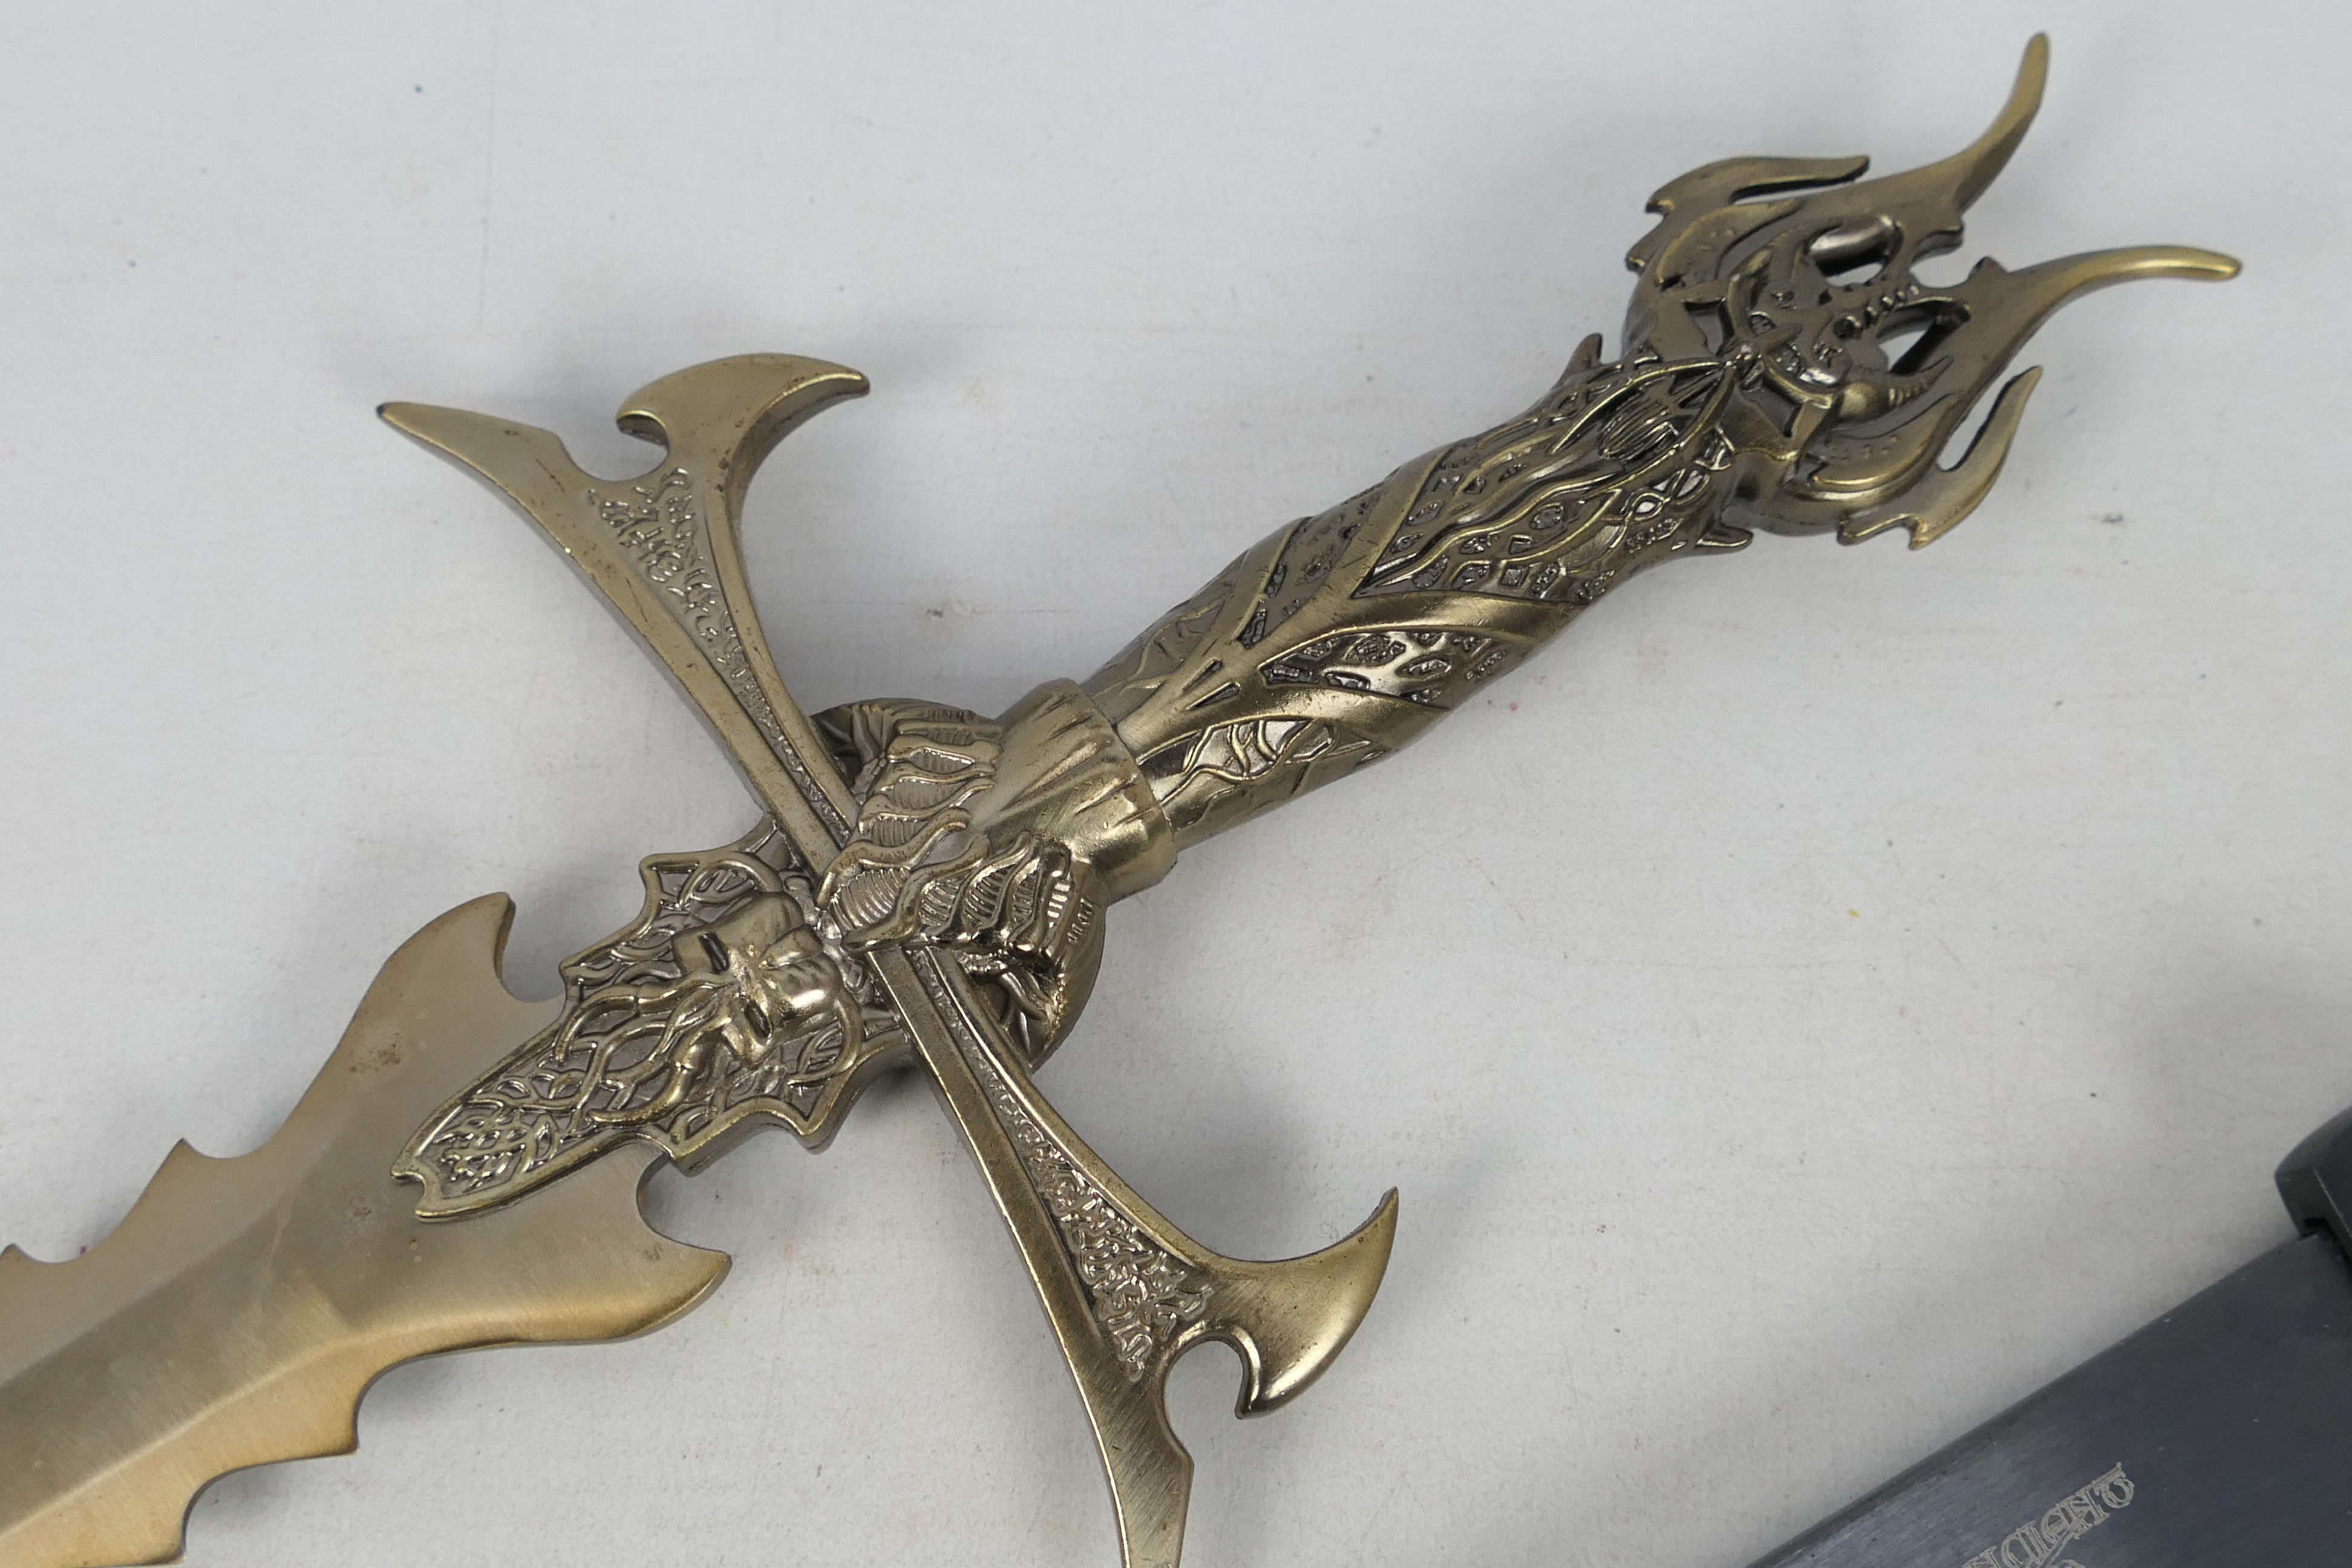 An Ancient Warrior short sword and a fantasy type dagger, largest approximately 63 cm (l). - Image 2 of 6